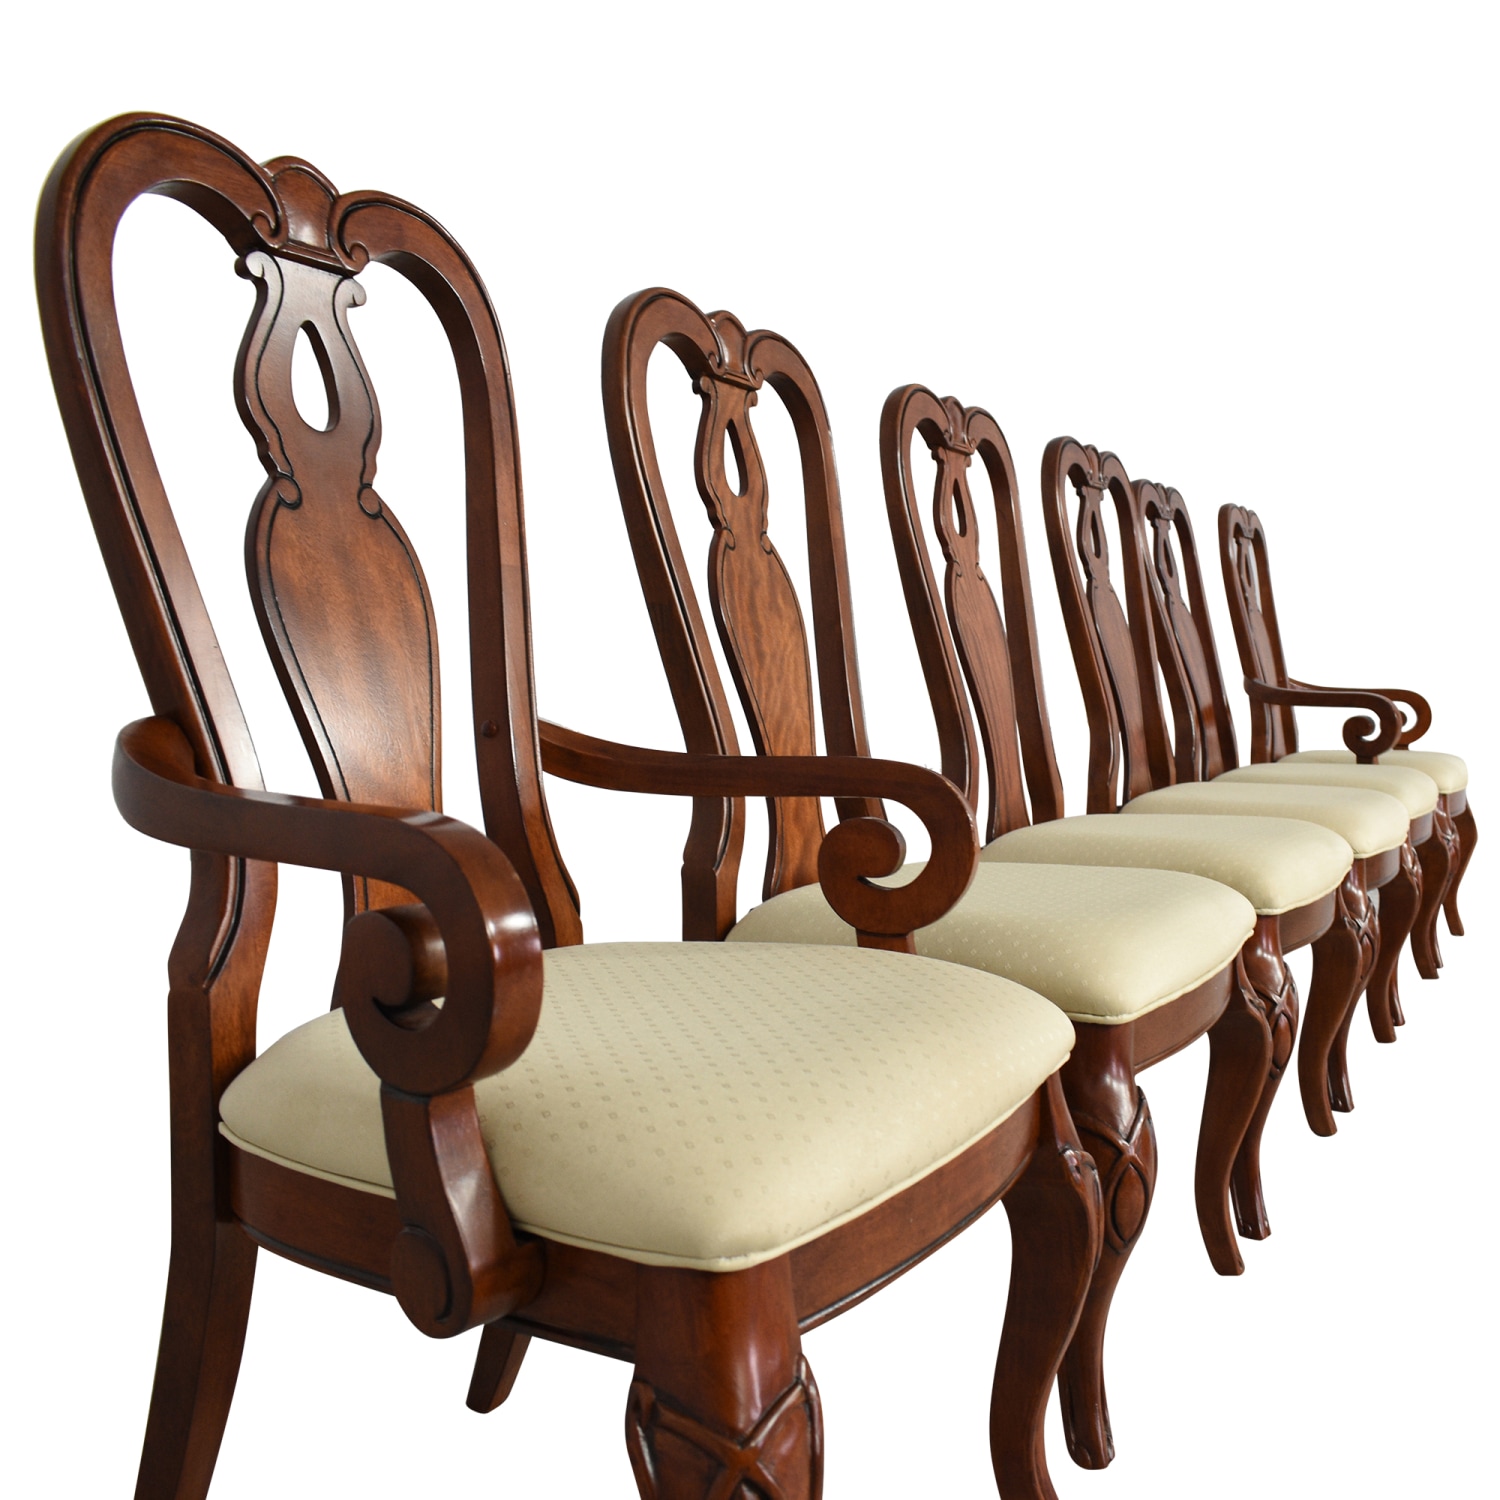 https://res.cloudinary.com/dkqtxtobb/image/upload/f_auto,q_auto:best,w_1500/product-assets/197151/legacy-classic-furniture/chairs/dining-chairs/legacy-classic-furniture-evolution-queen-anne-dining-chairs-used.jpeg